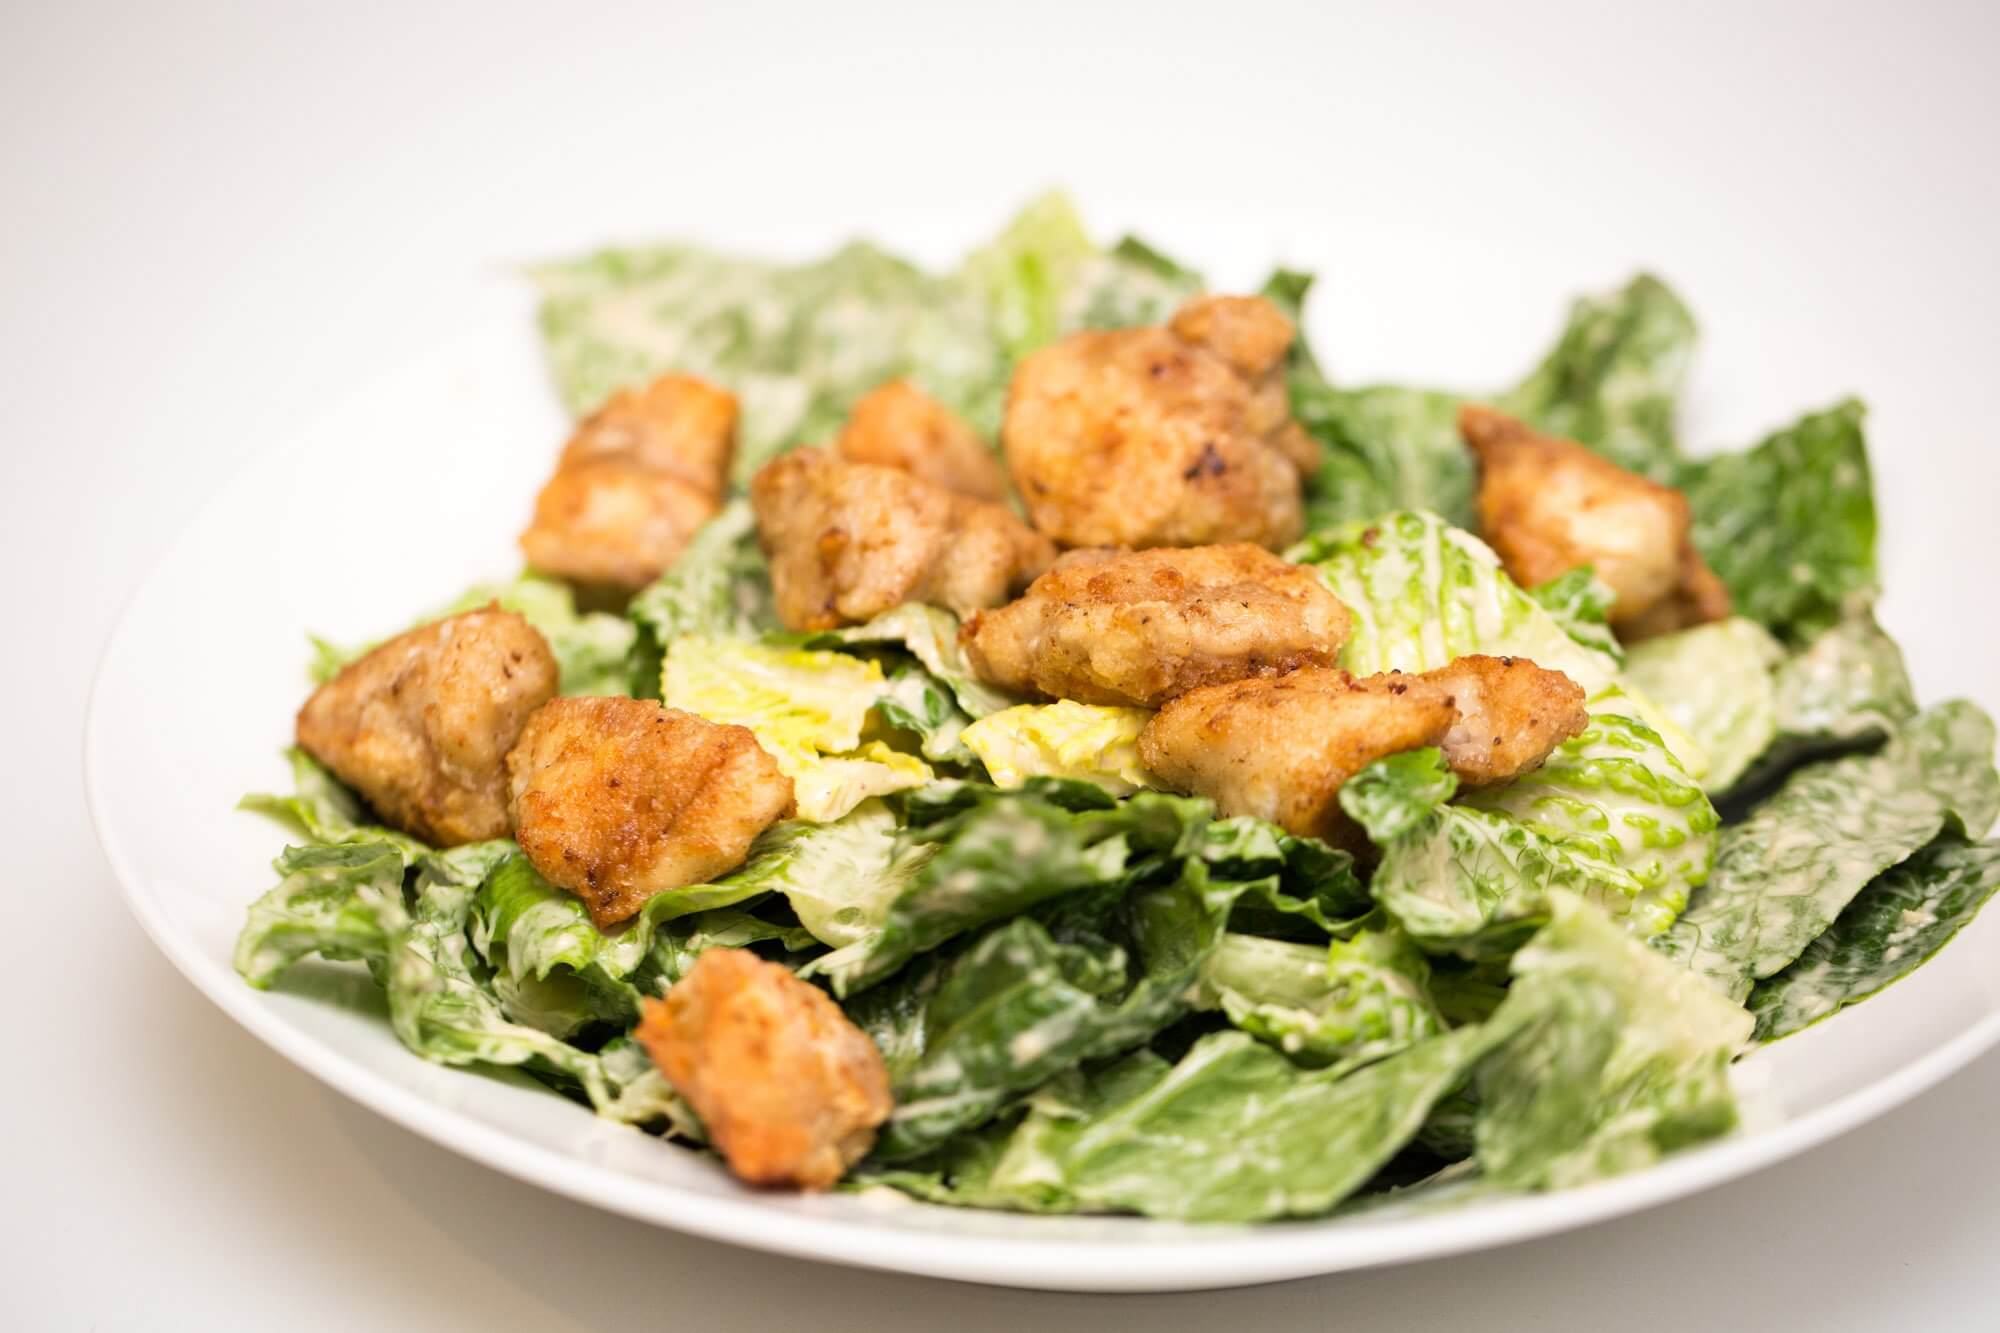 Classic Caesar salad with chicken croutons